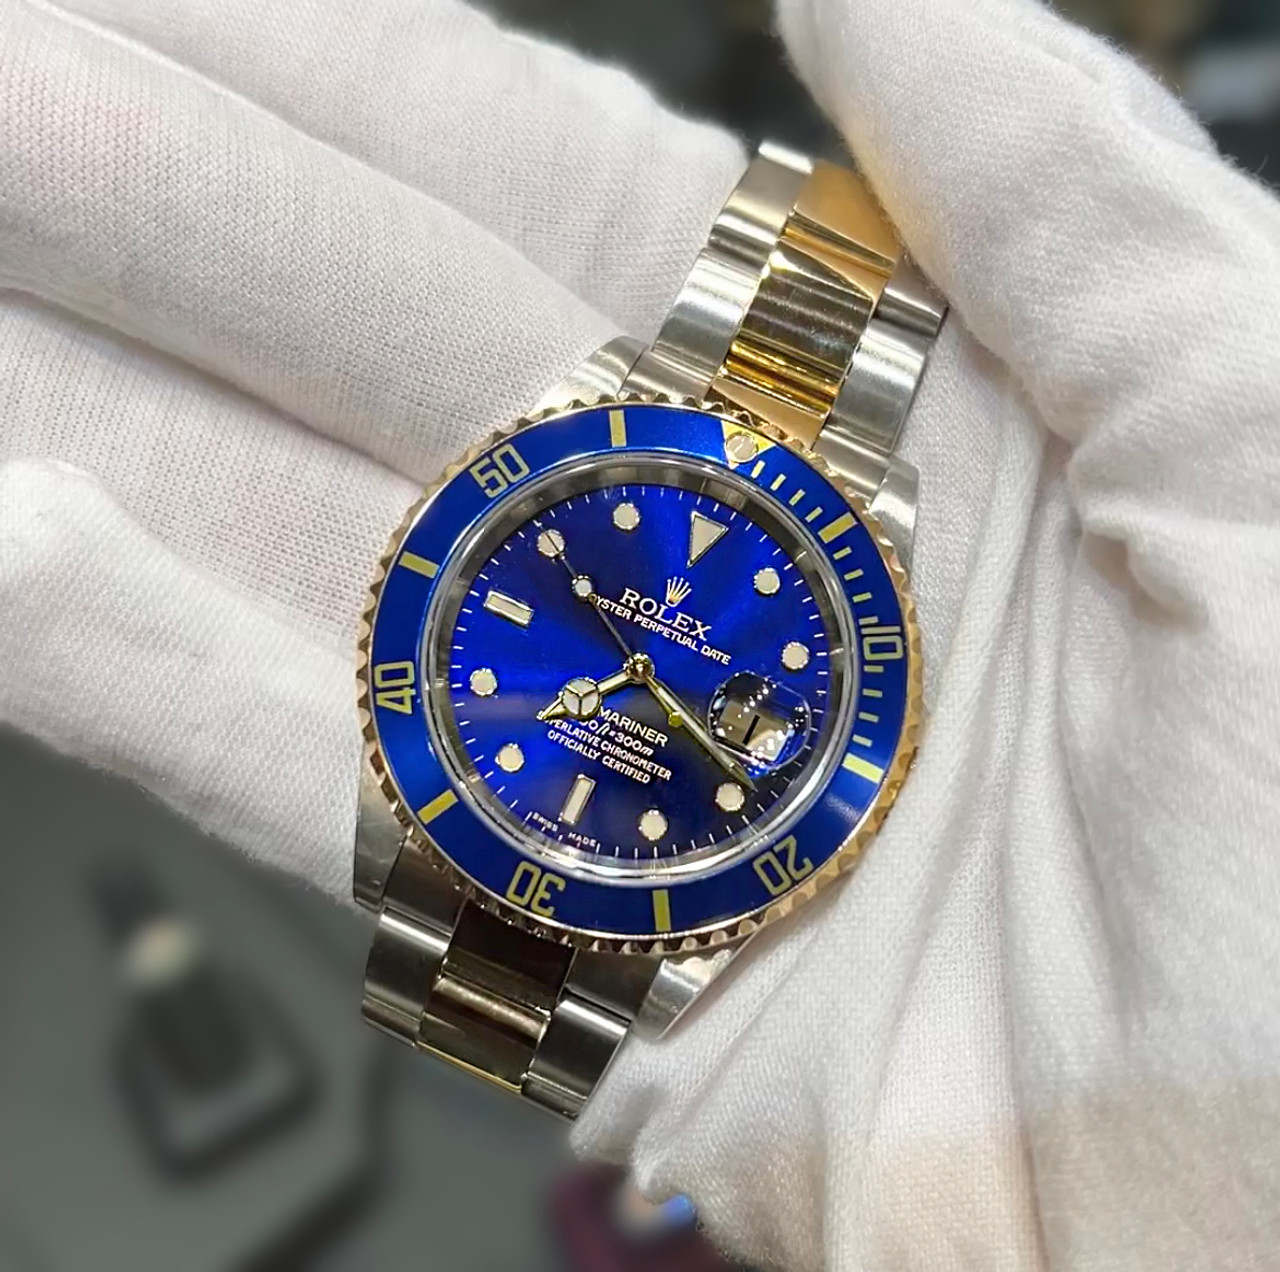 Rolex Submariner Two-Tone with Blue and Bezel, and tags.